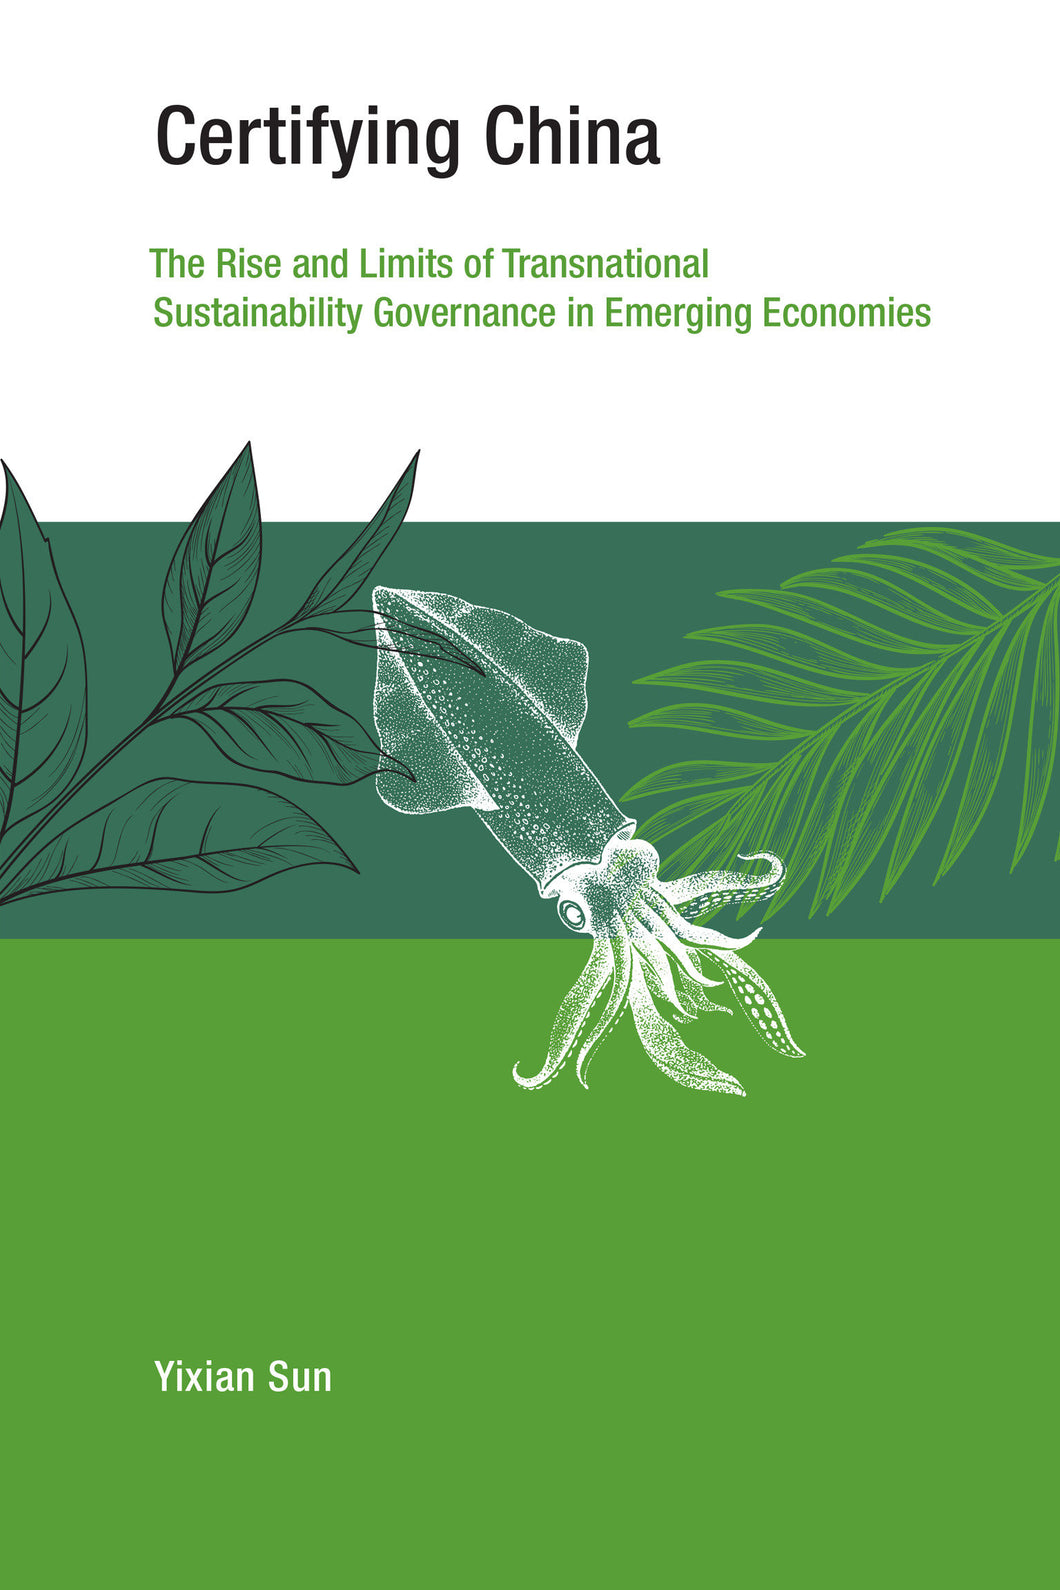 Certifying China: The Rise and Limits of Transnational Sustainability Governance in Emerging Economies